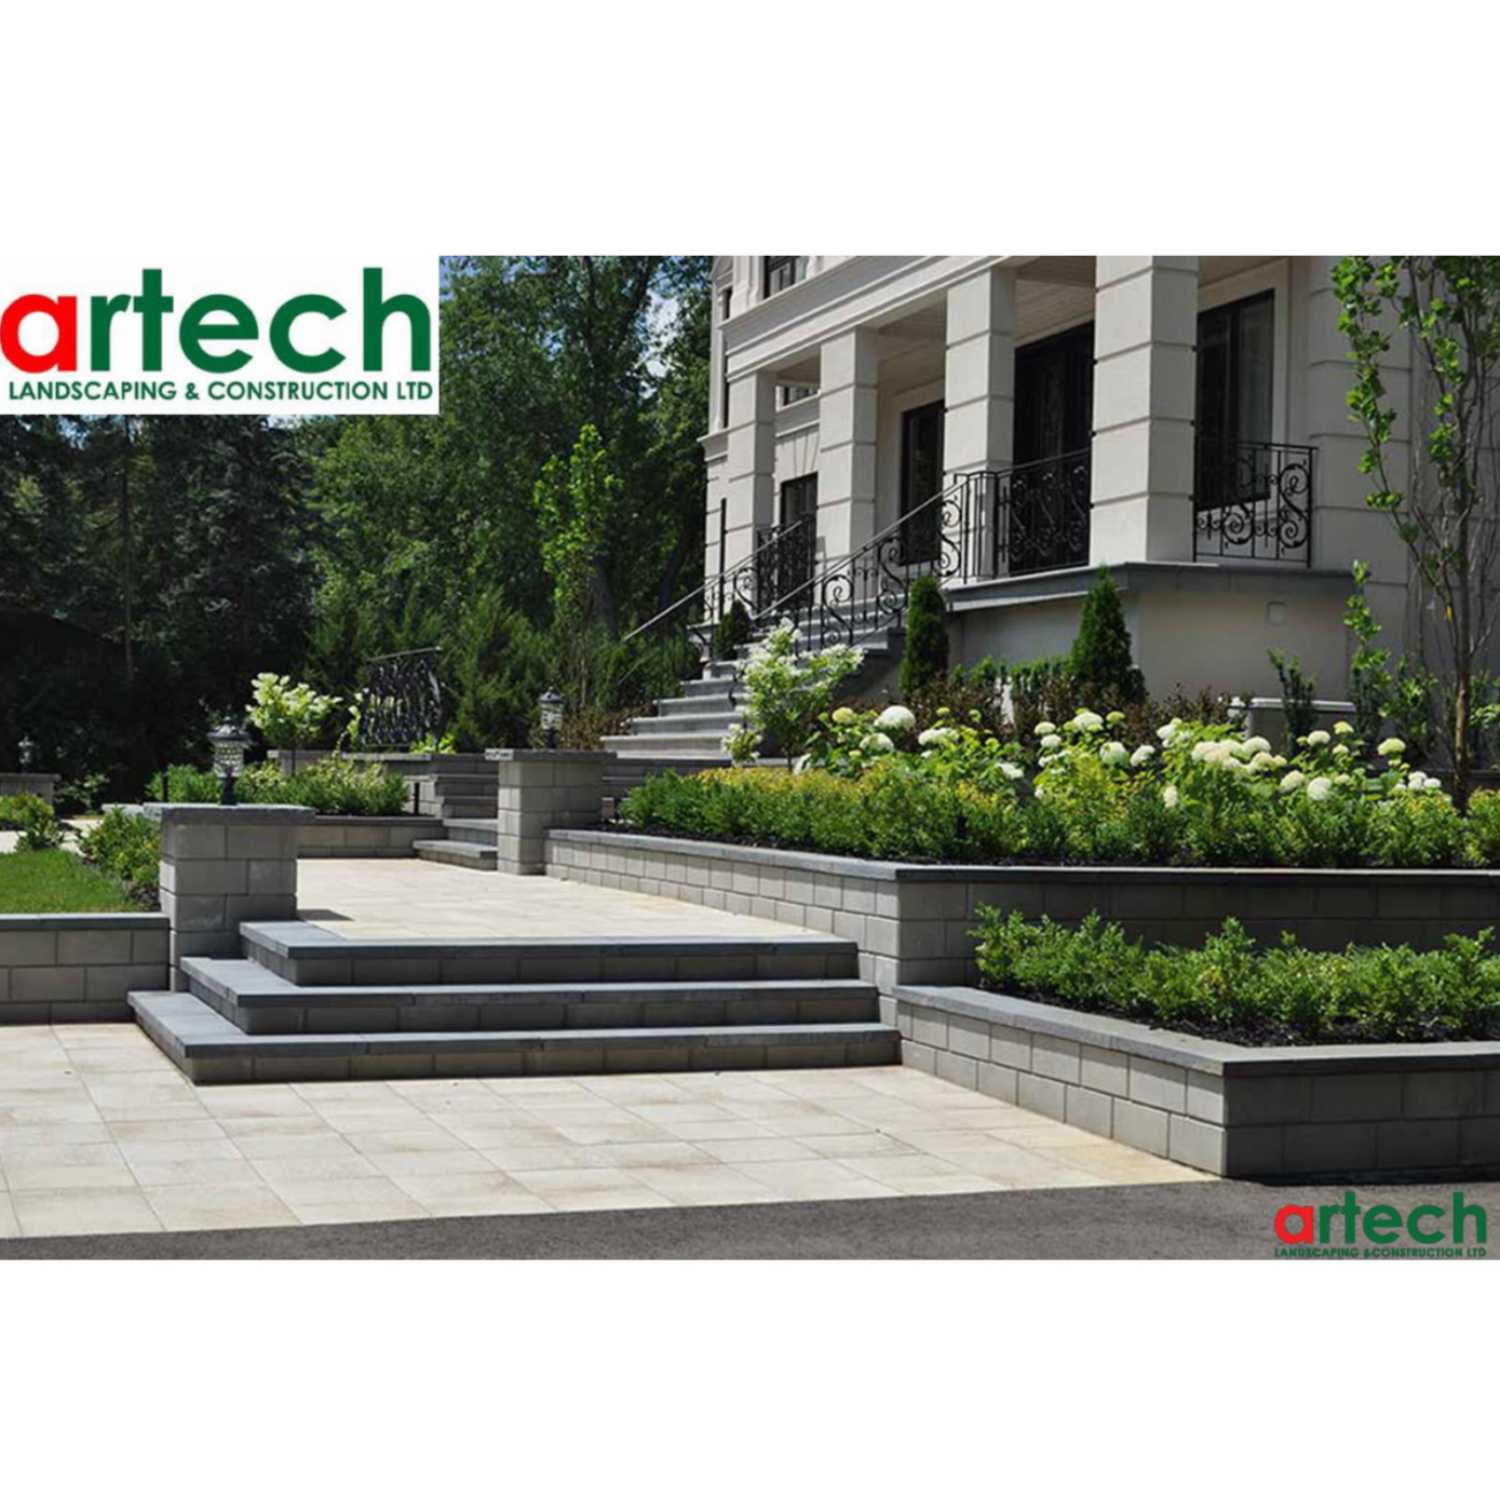 Artech Landscaping and Construction Podcast